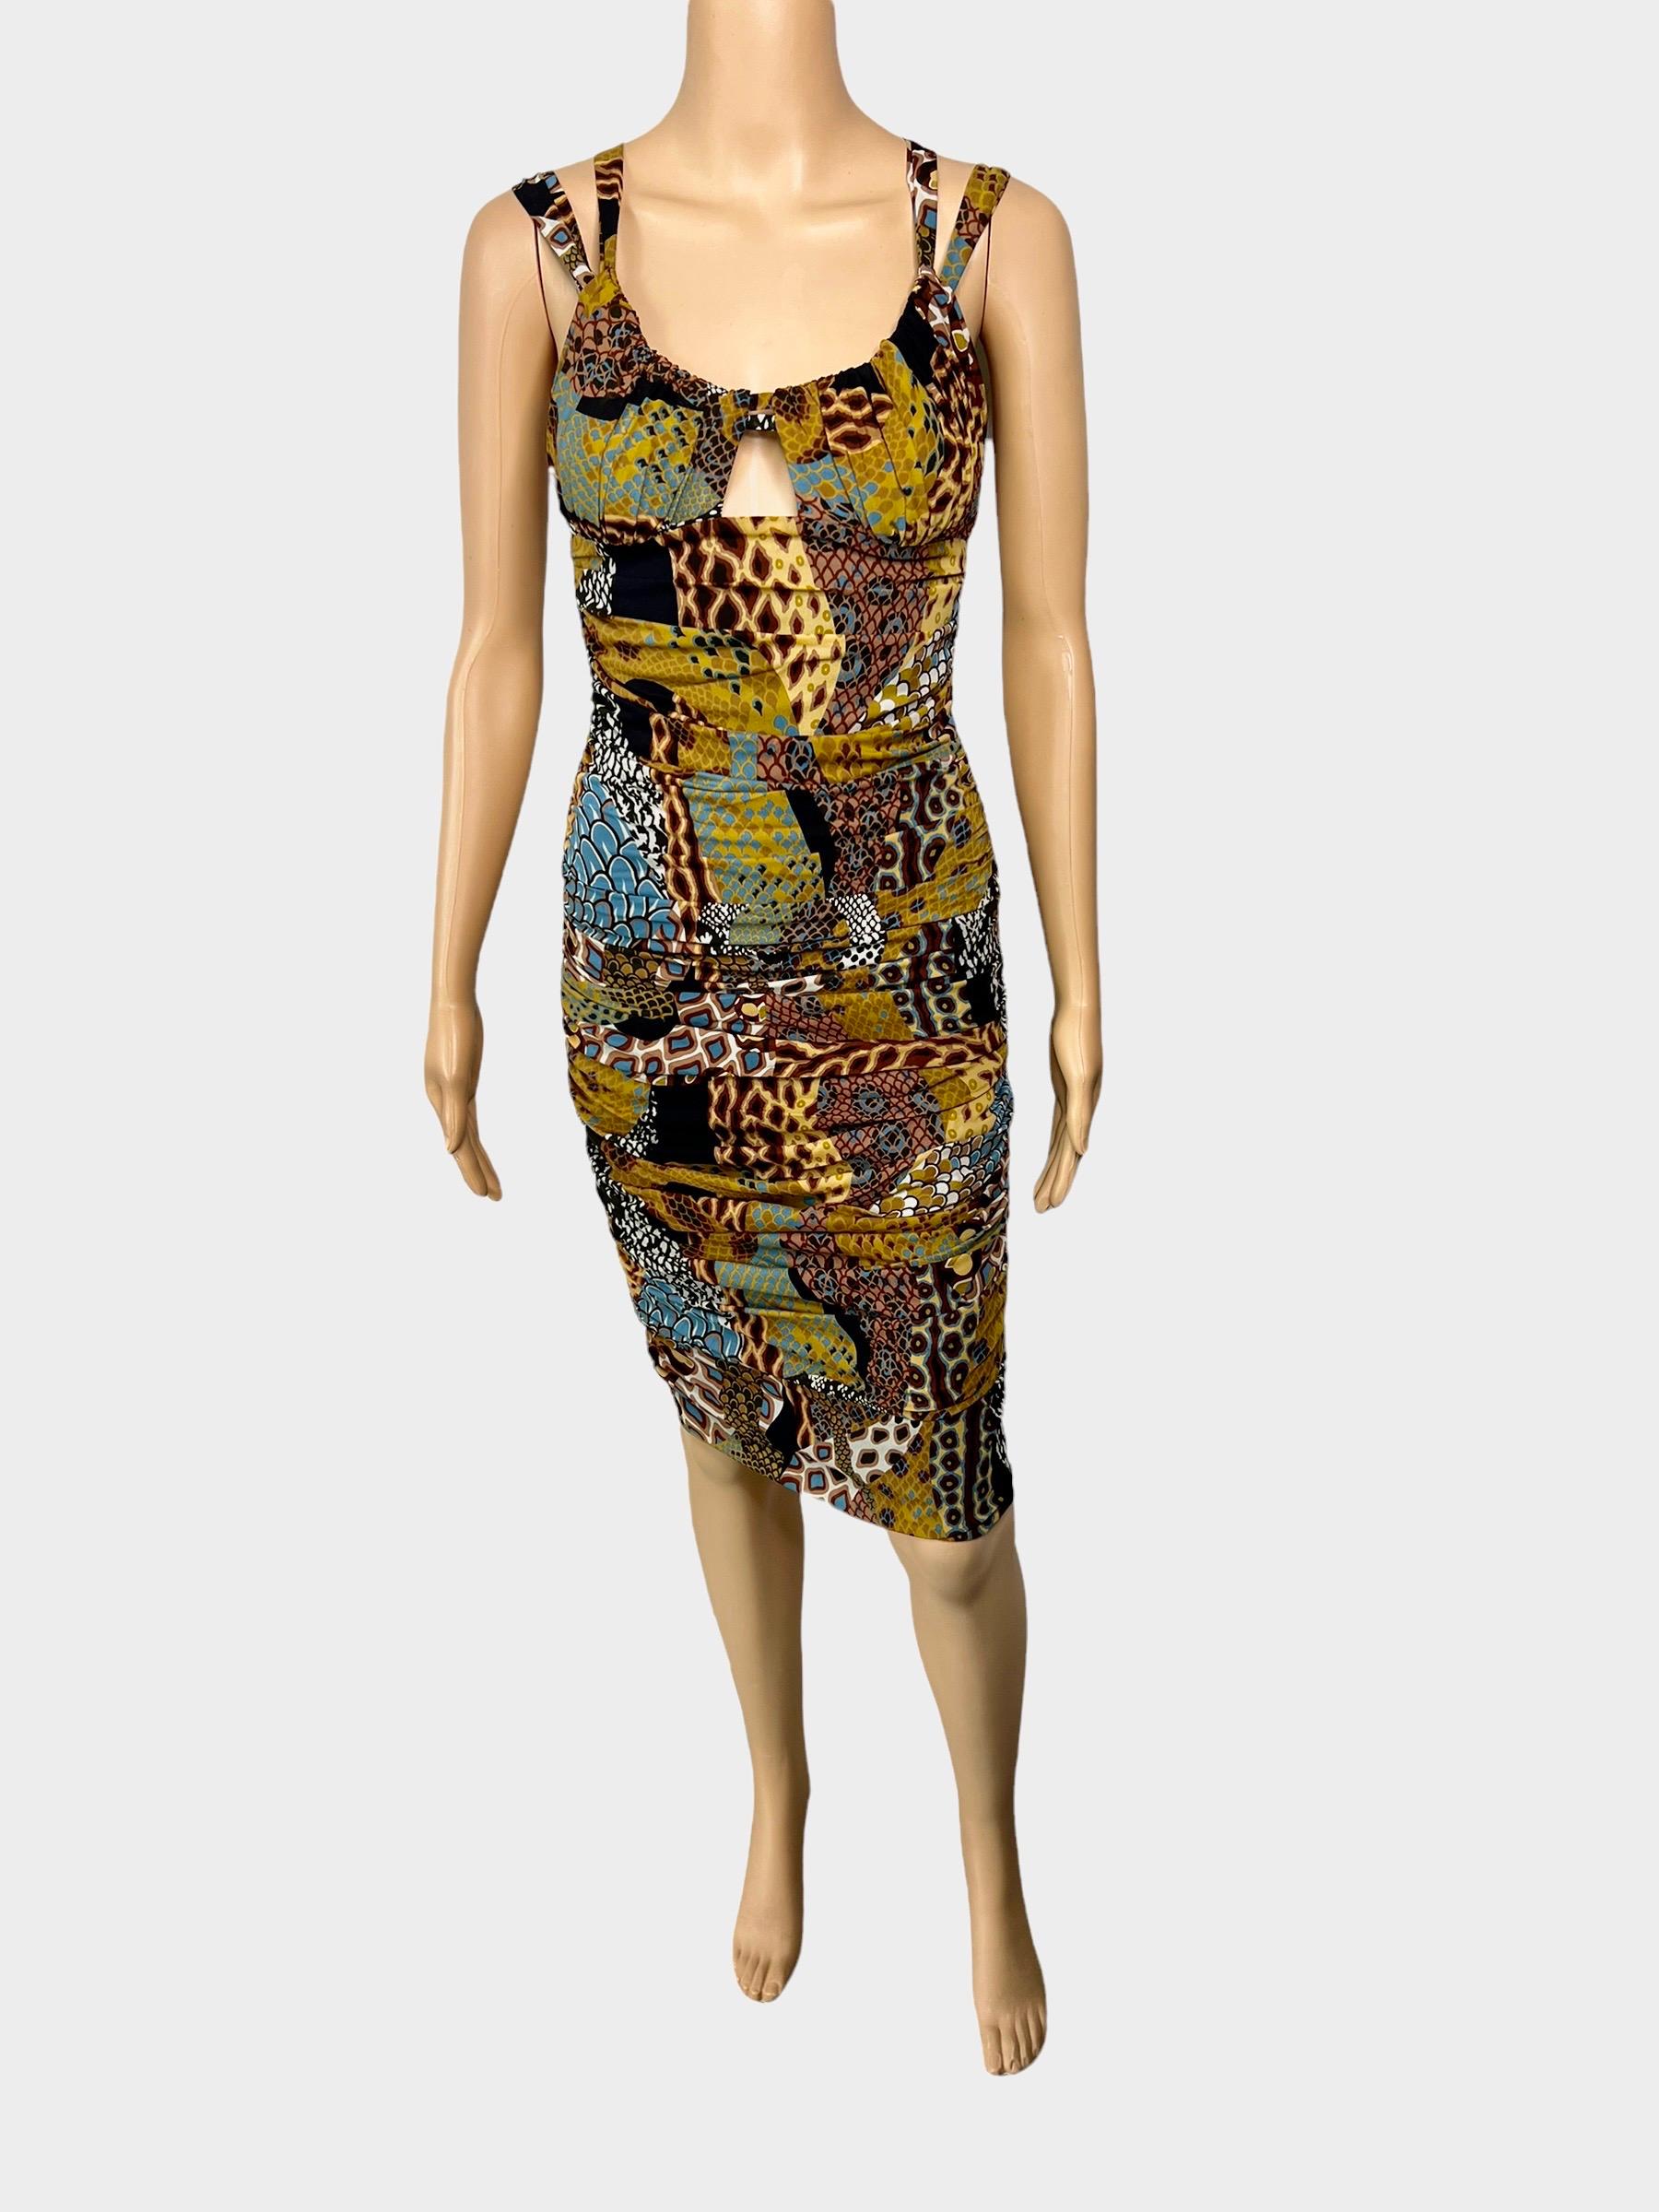 Women's Versace F/W 2005 Runway Plunging Neckline Ruched Animal Print Dress For Sale